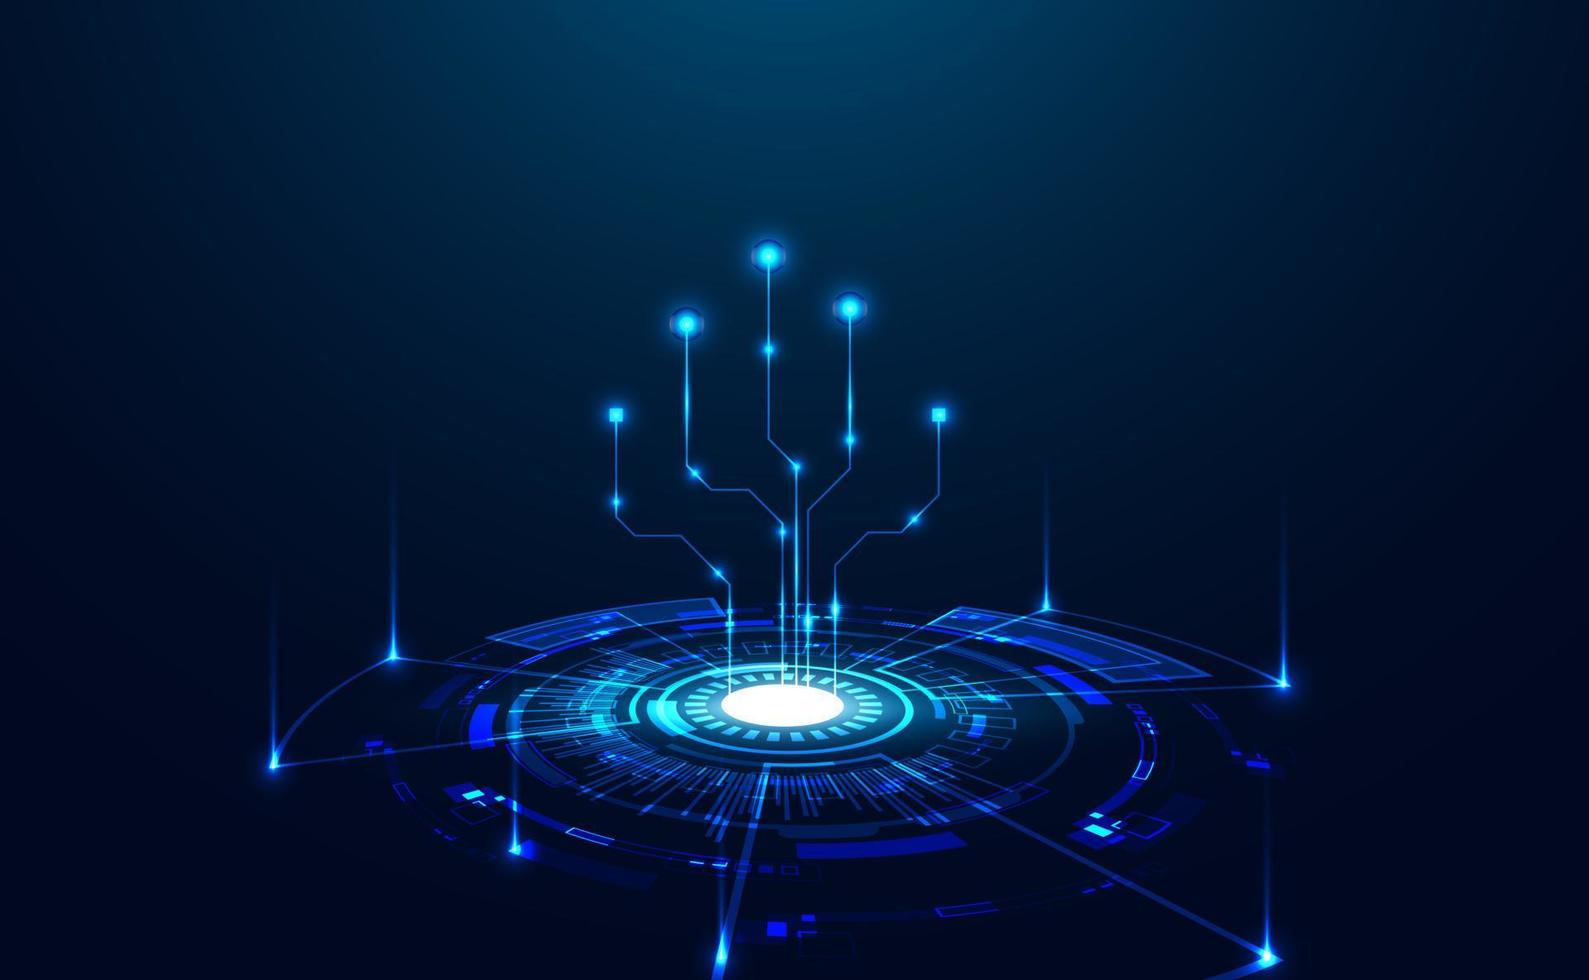 Abstract Circle Digital Circuit Concept Light Circle Network Connection  Blue Digital Copy Space for Text Wallpaper Background Futuristic Modern.  12870990 Vector Art at Vecteezy